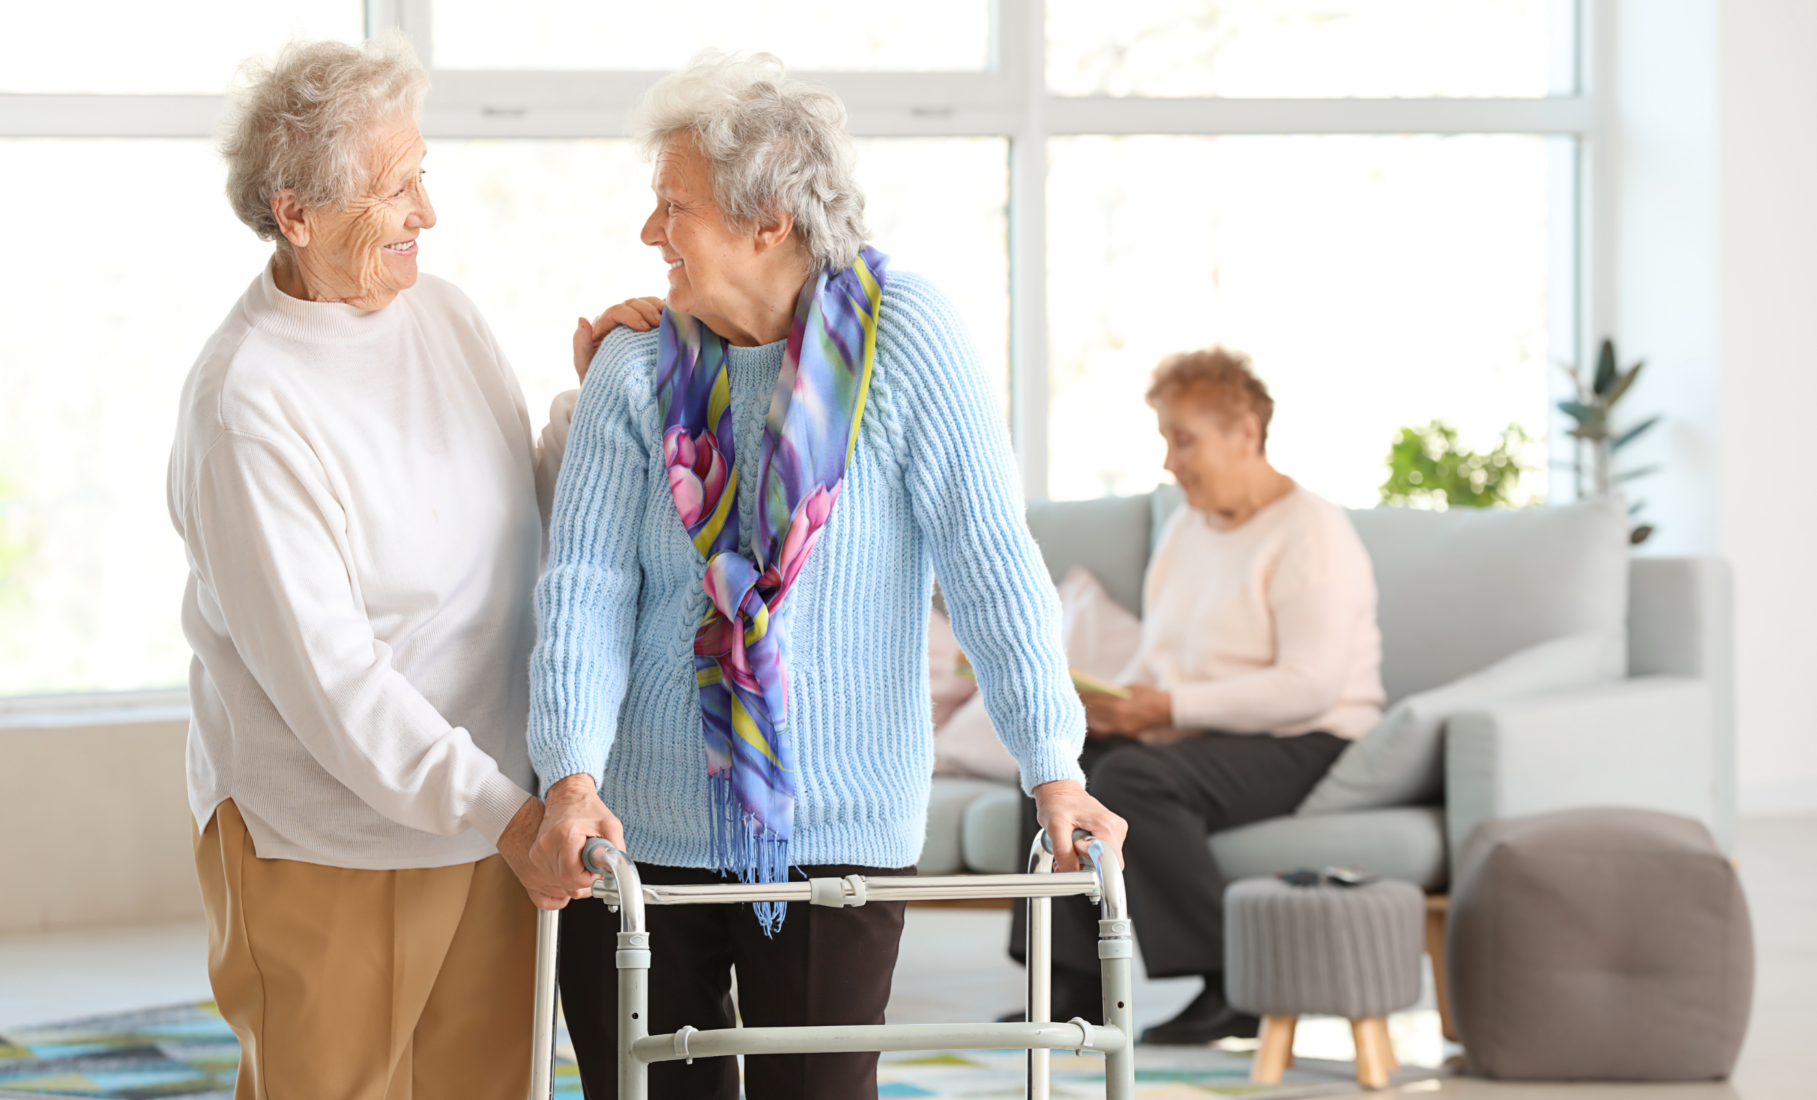 Aged Care and Individual Support in Aged Care facility by Look Now Training